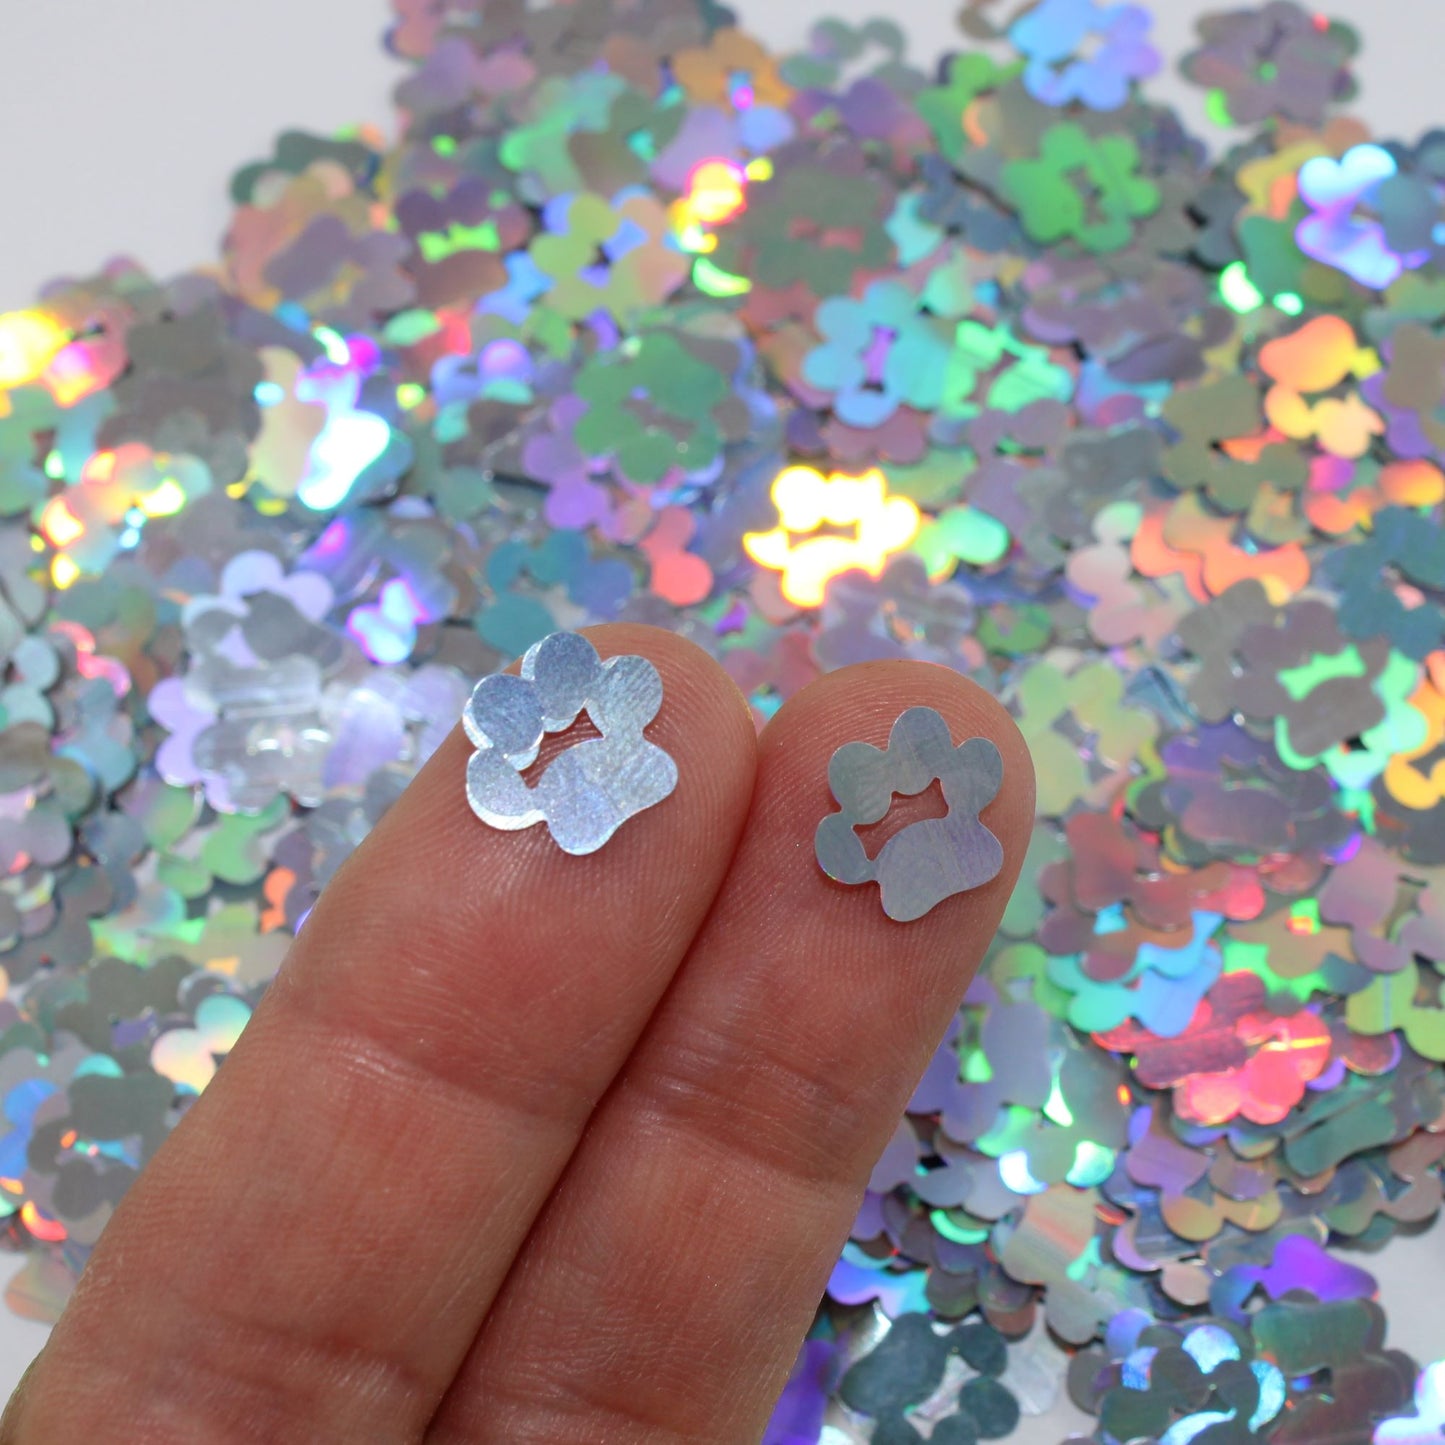 Dog Paws Holographic Shaped Glitter